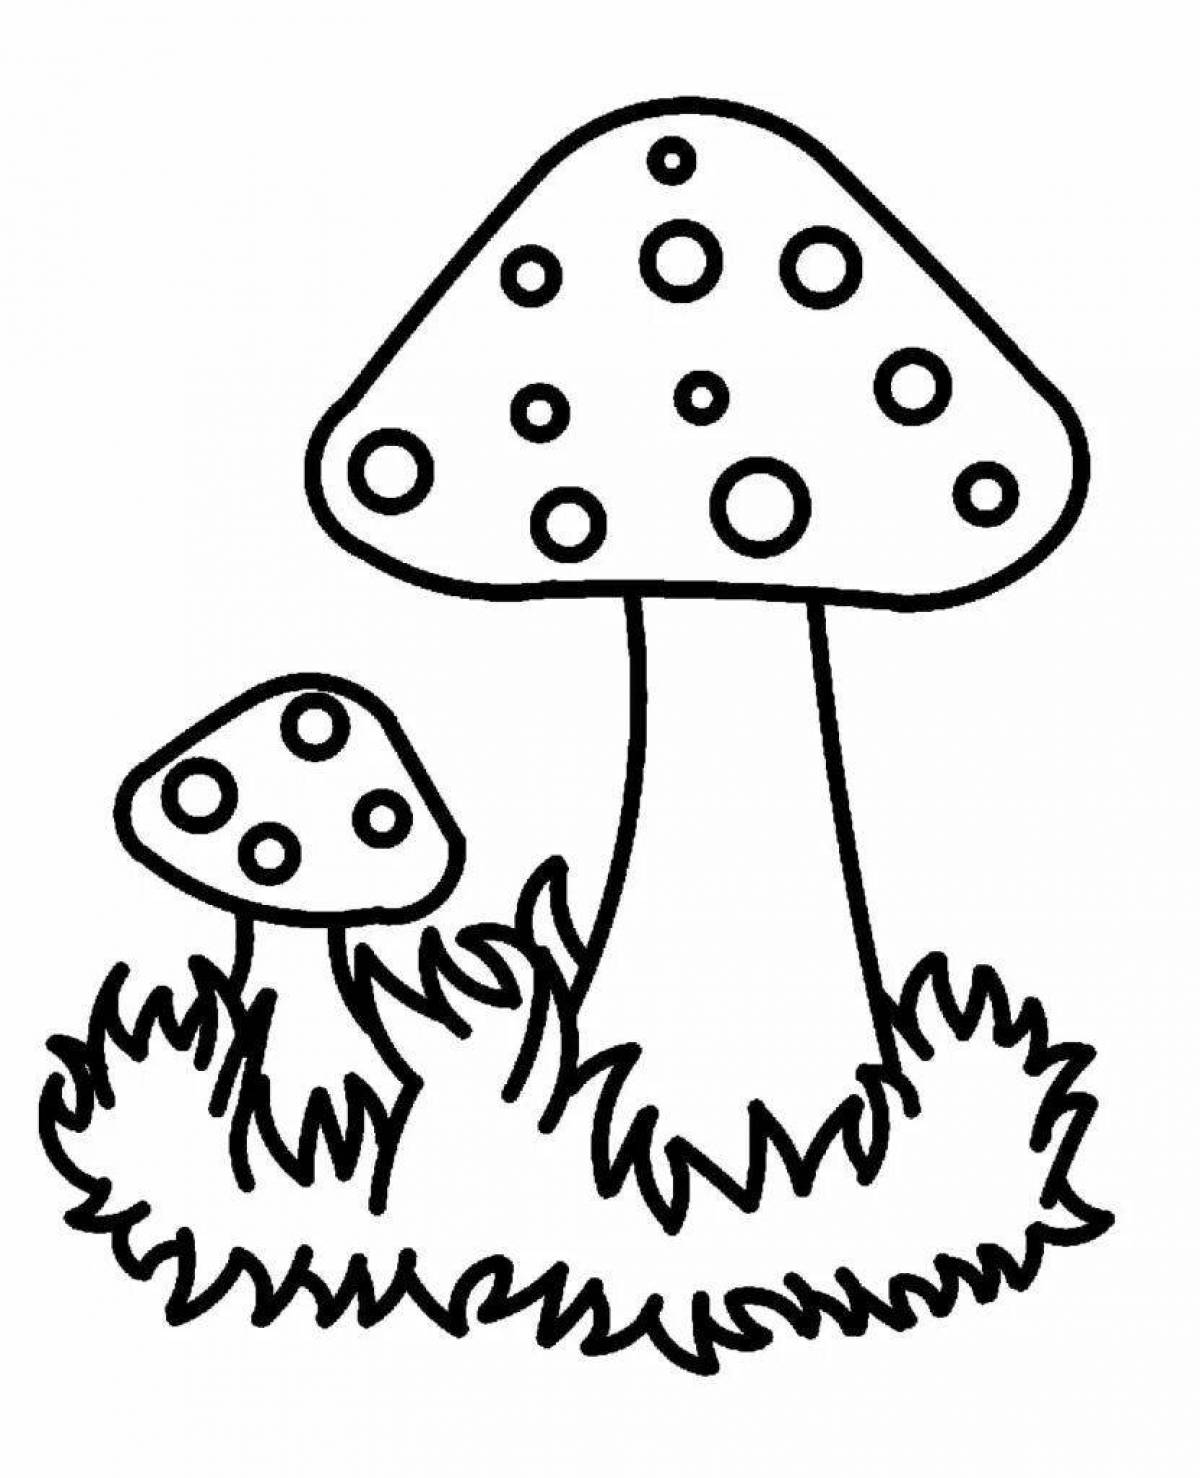 Coloring book exquisite mushroom fly agaric